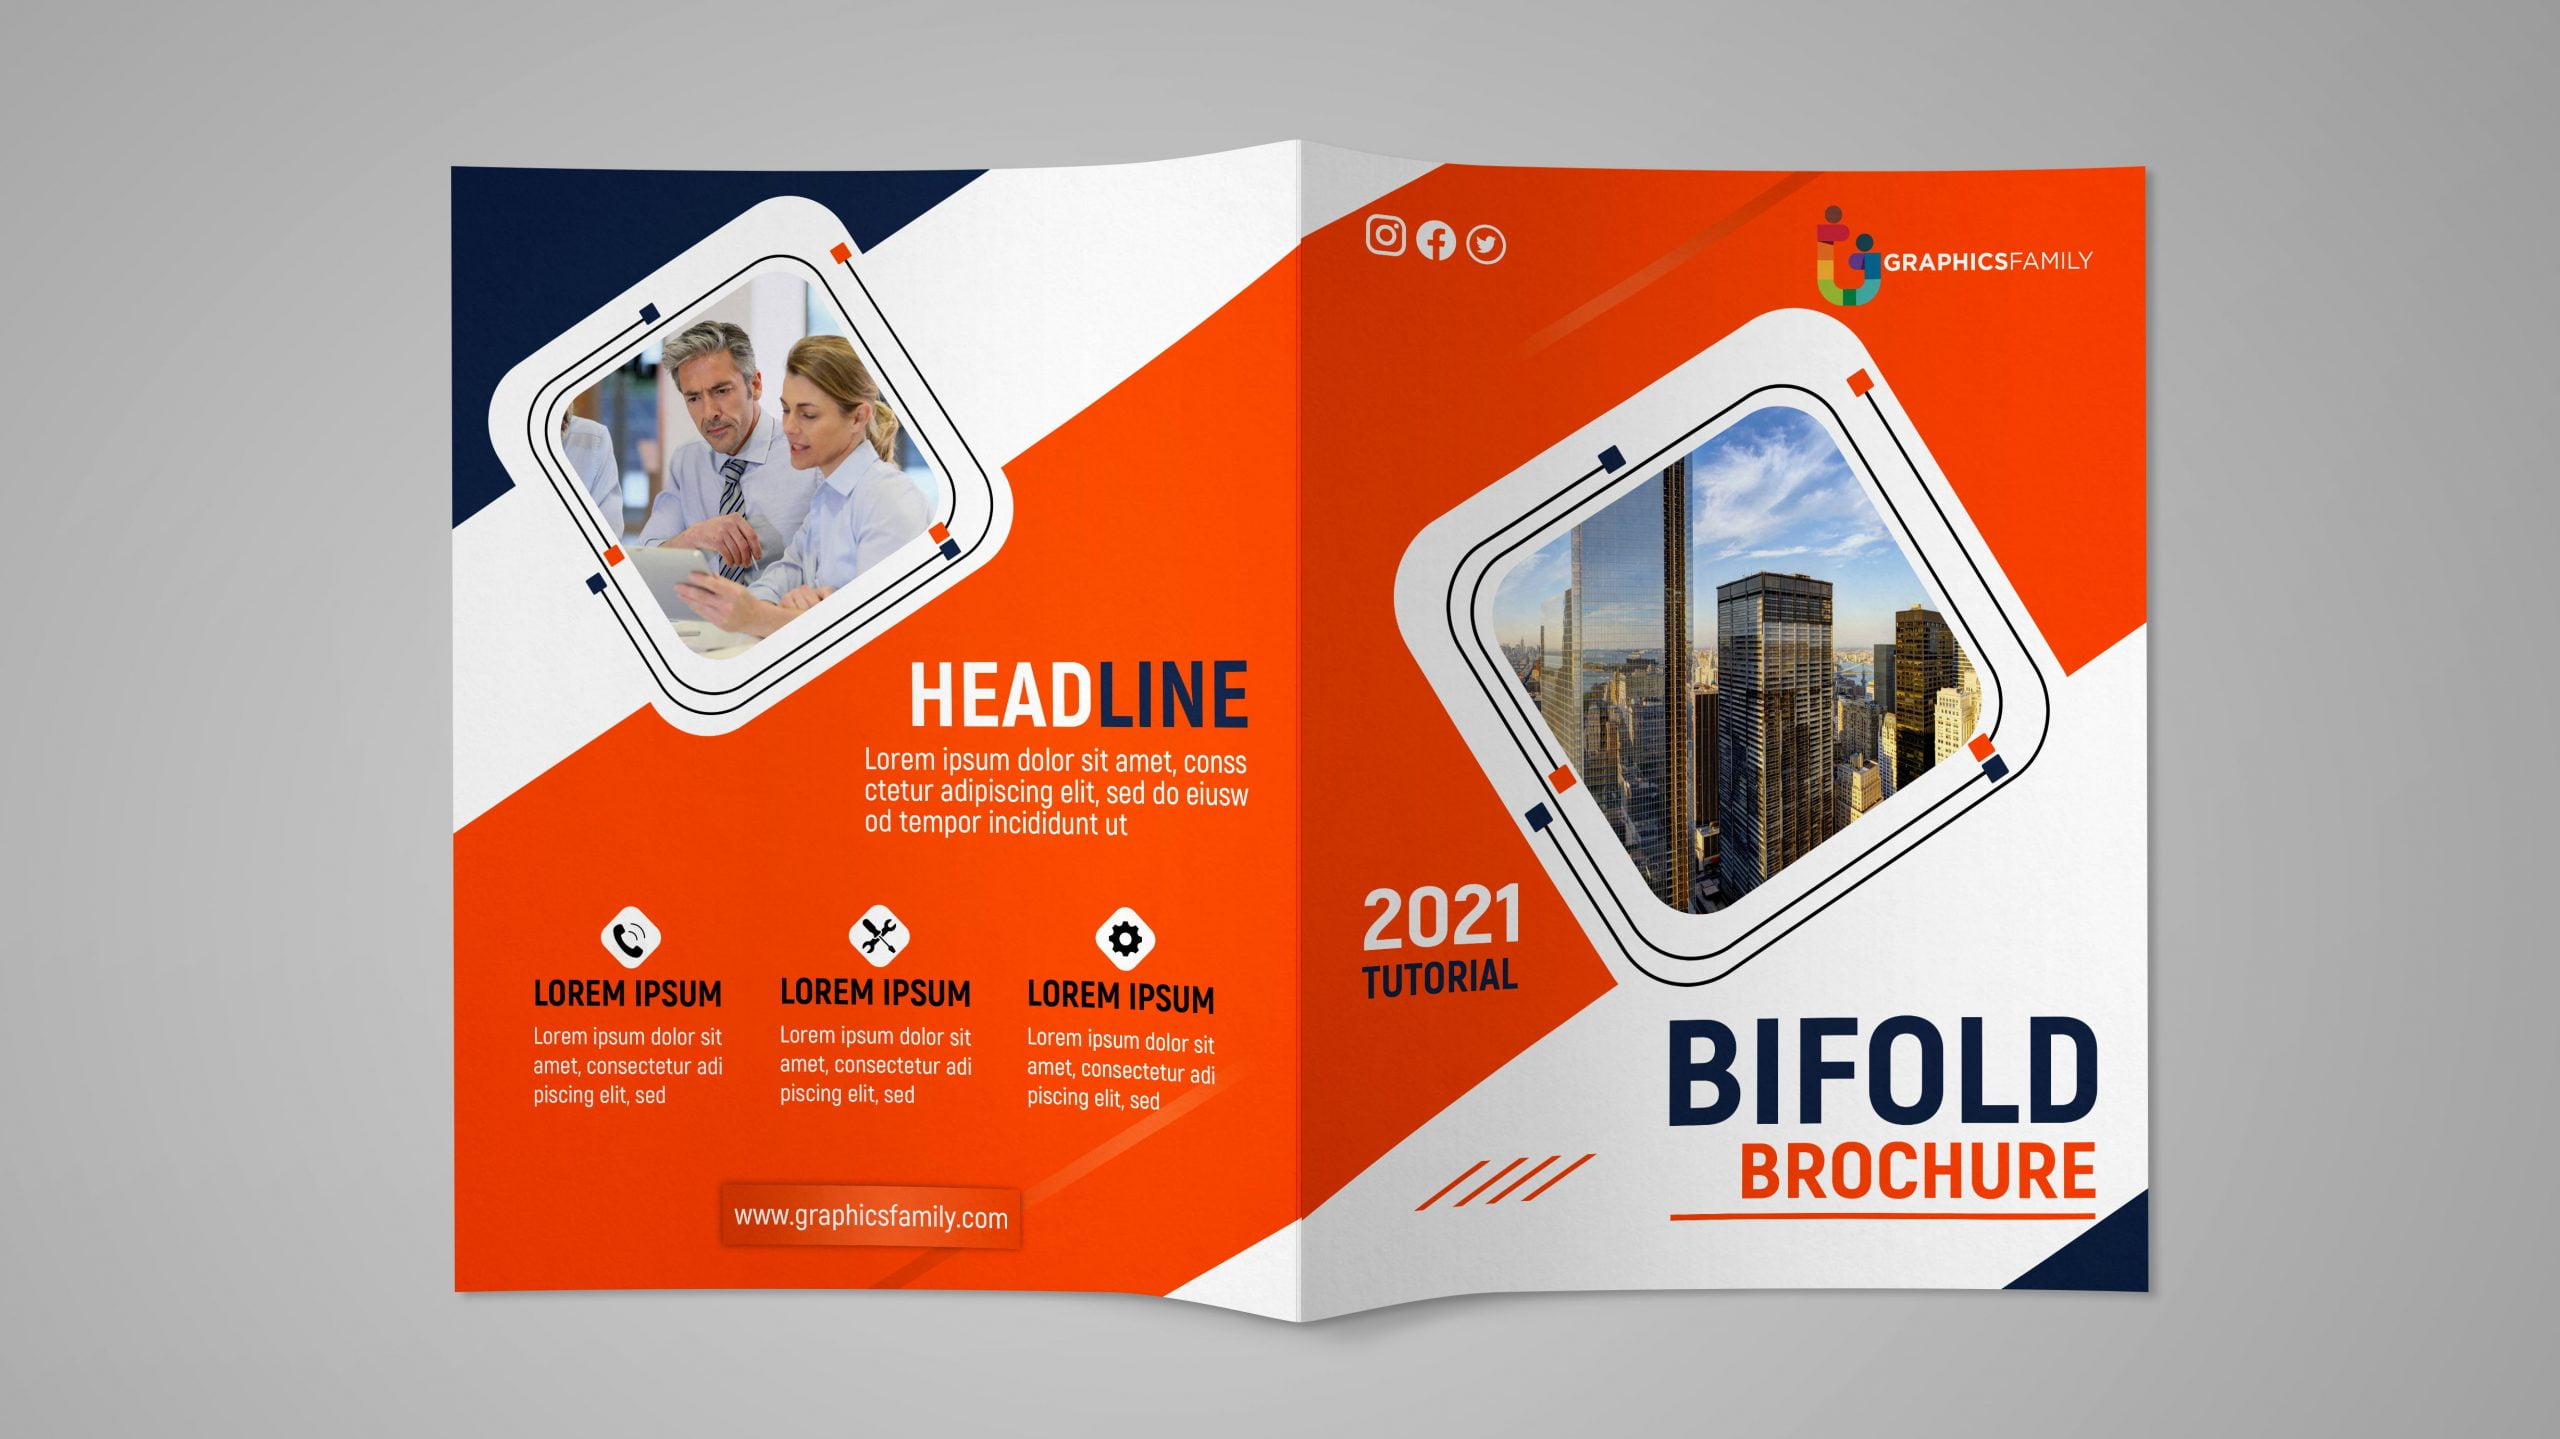 Free Simple Bifold Brochure Design for Photoshop